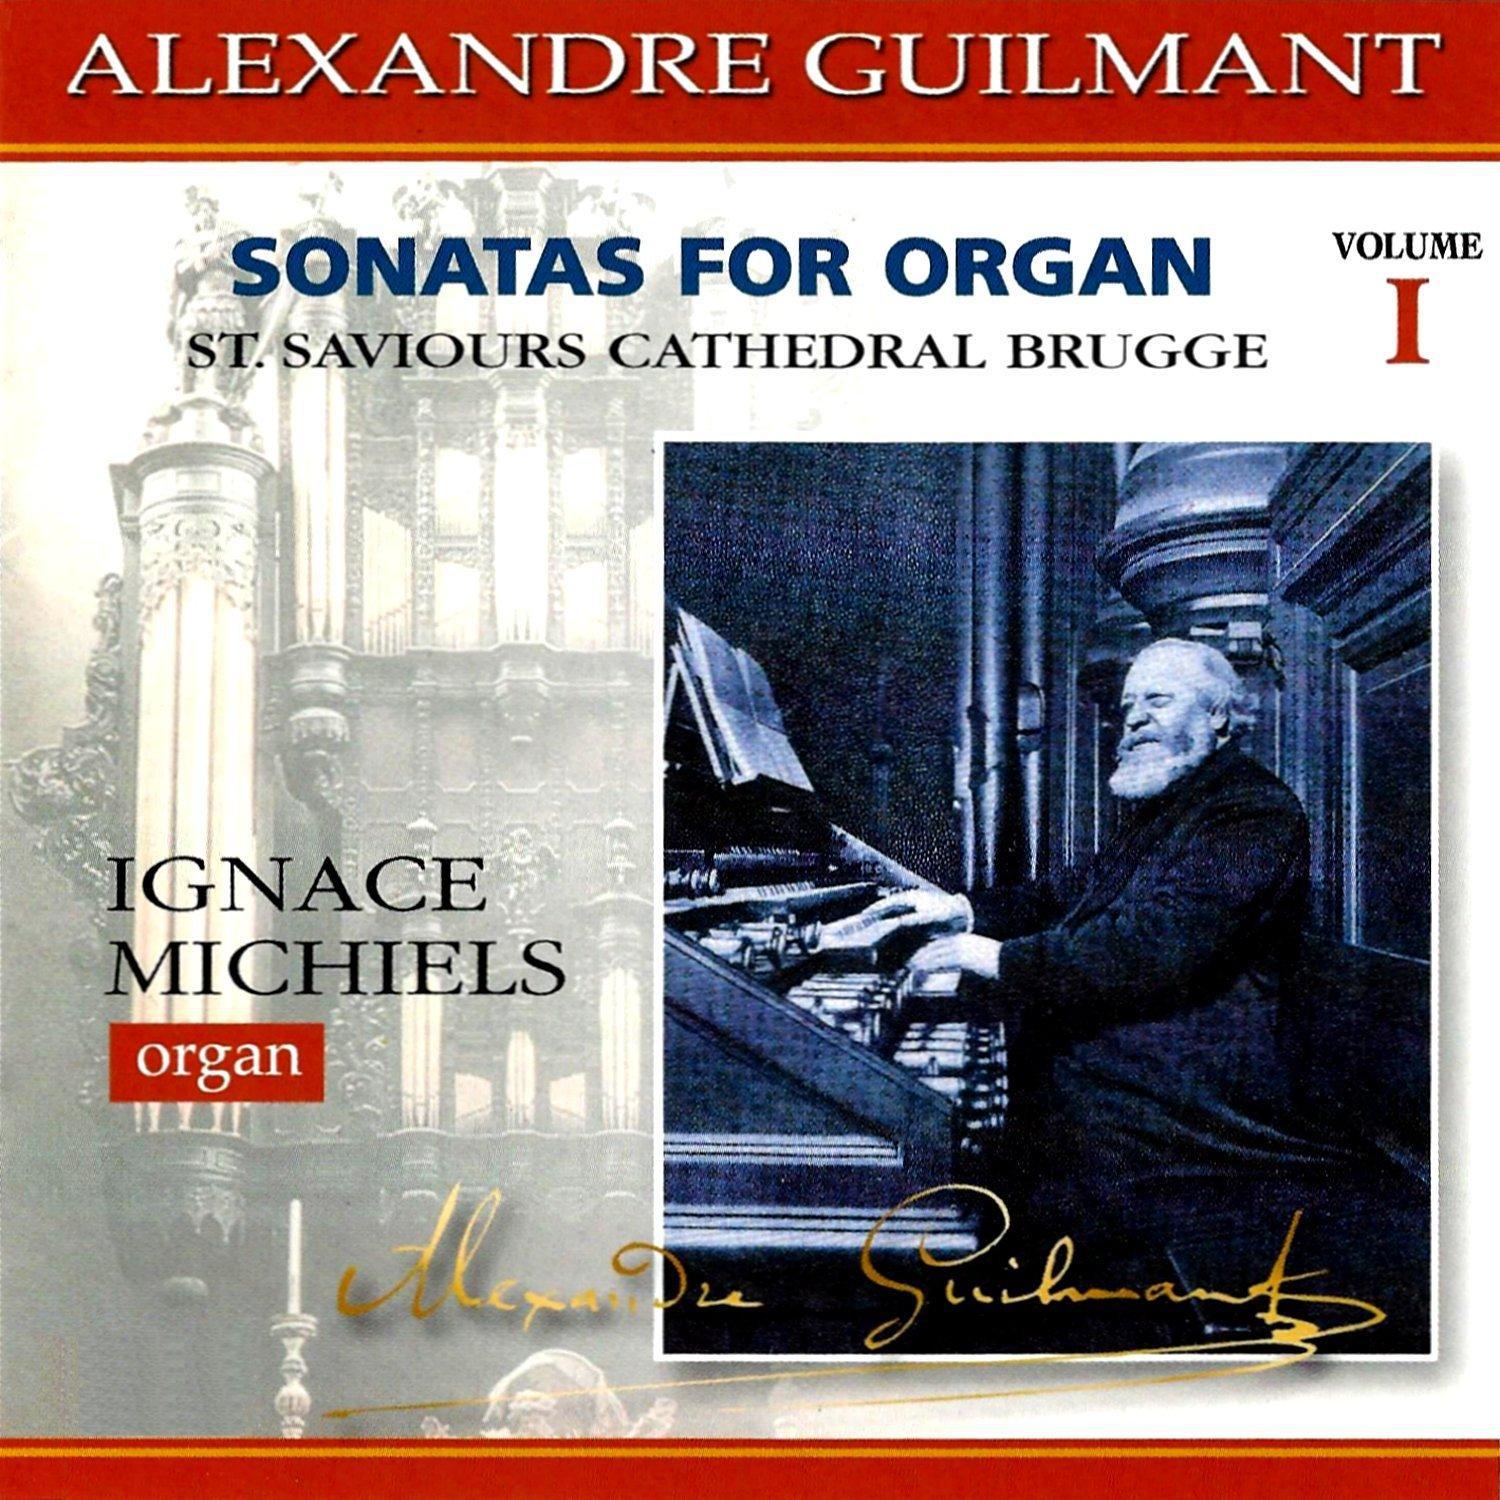 Ignace Guilmant - Sonate No. 1 in D Minor, Op. 42: Introduction - Allegro